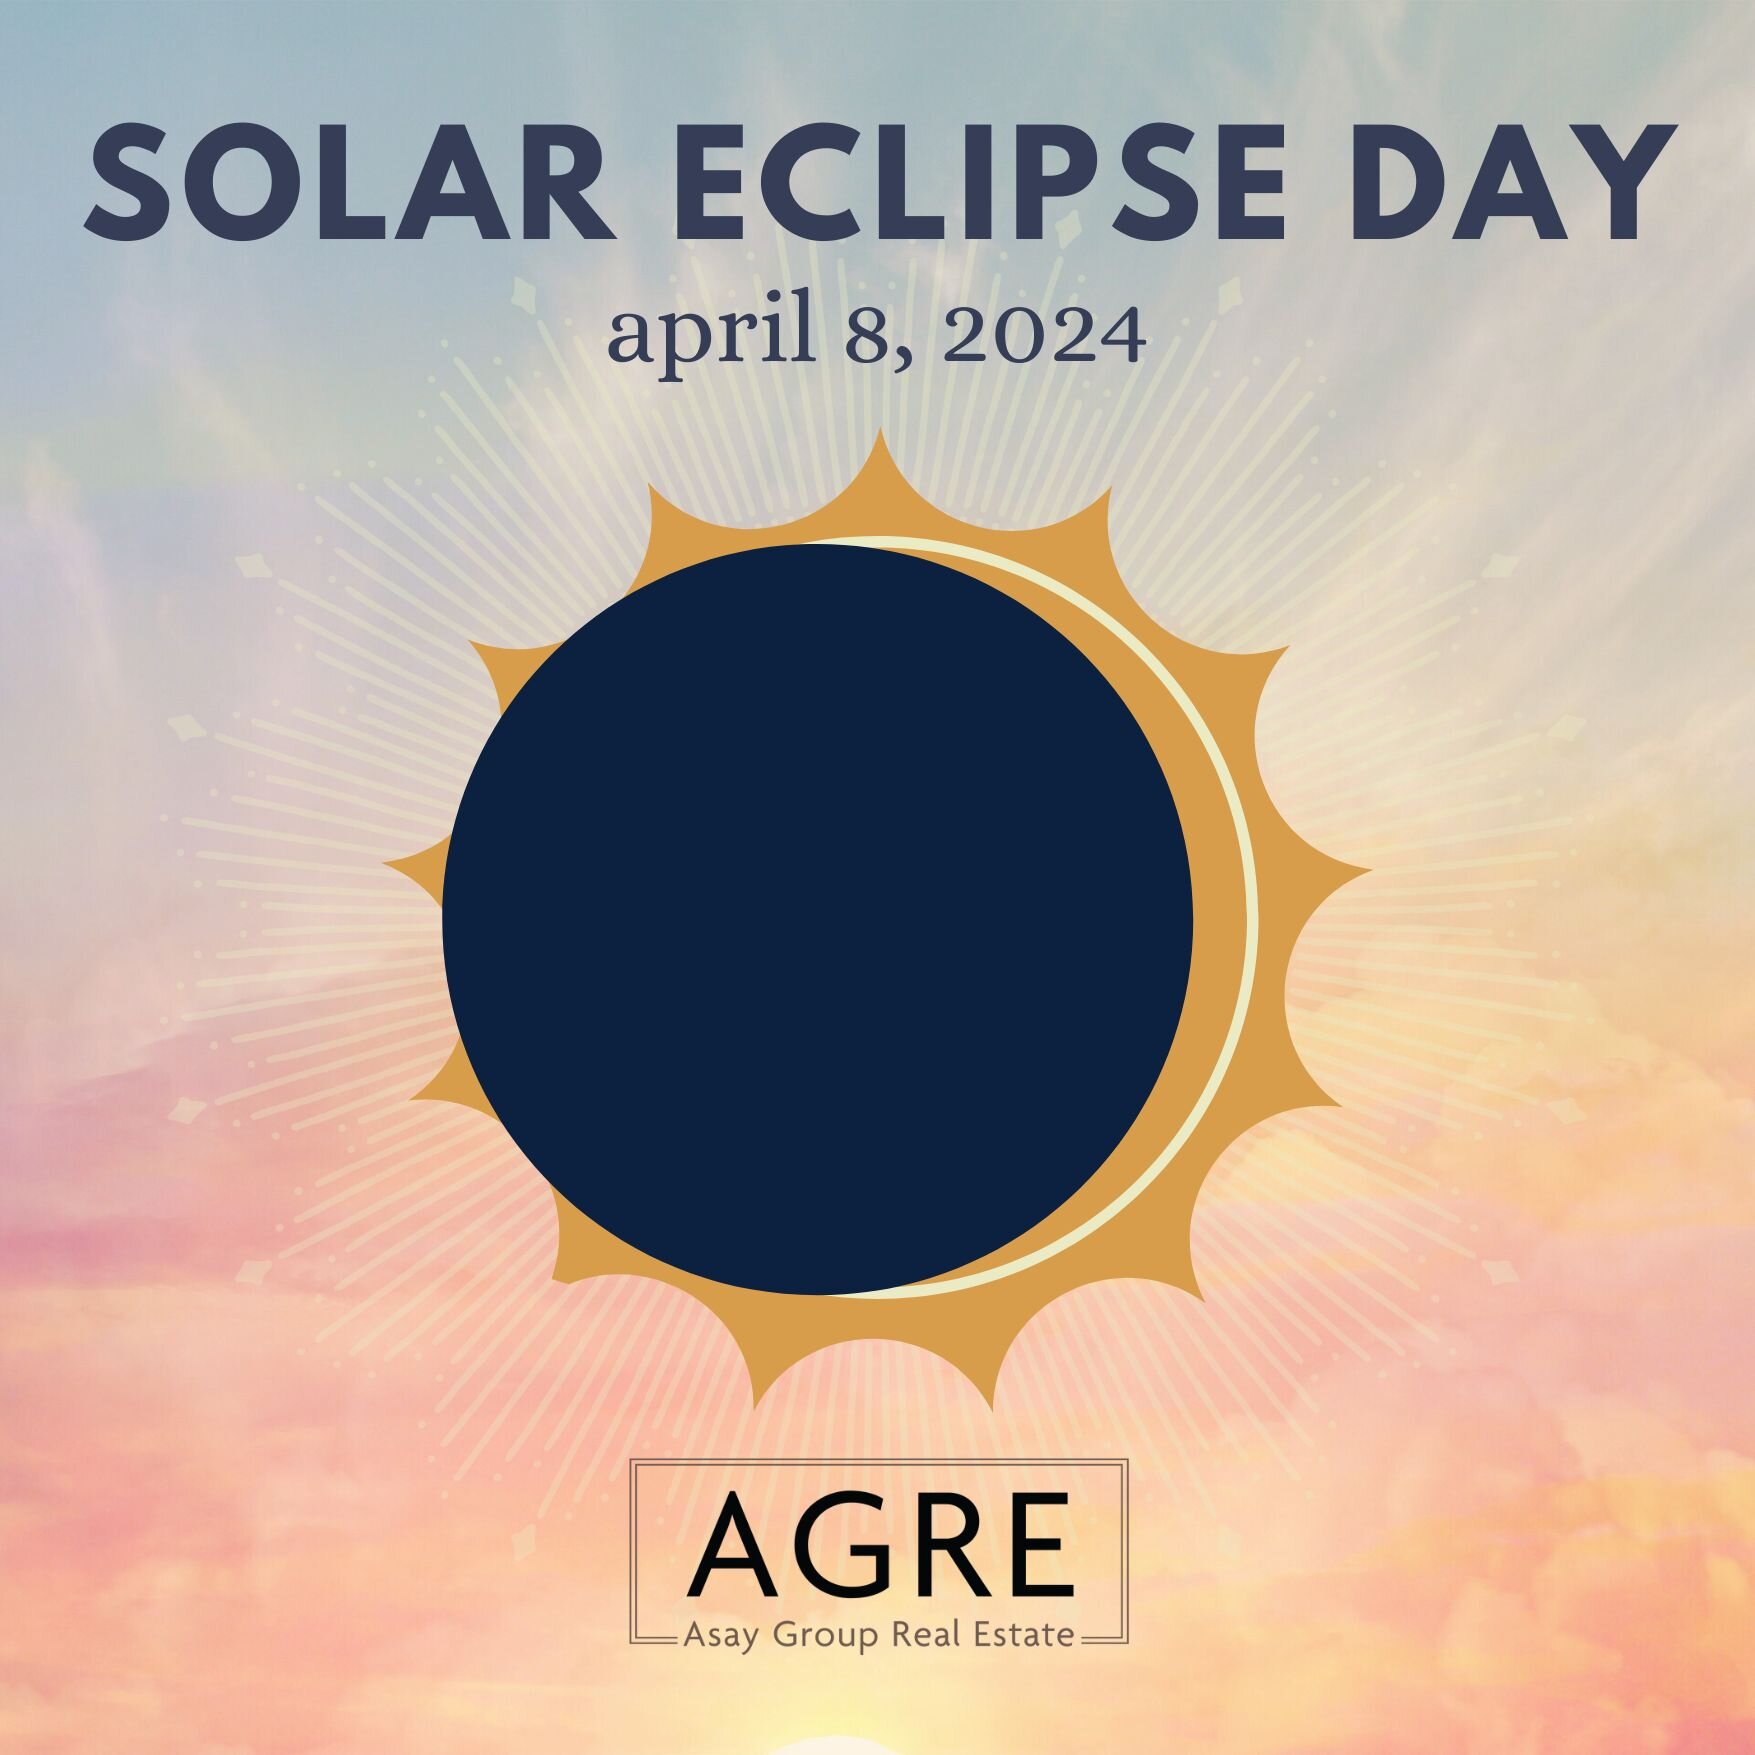 ☀️ Happy Eclipse Day 🌑 The event we have been talking about for months happens today! Book yourself &quot;out of the office&quot; and enjoy this historic event. The eclipse begins at 12:33 p.m. with Totality lasting from 1:40-1:44 p.m. It wraps up c